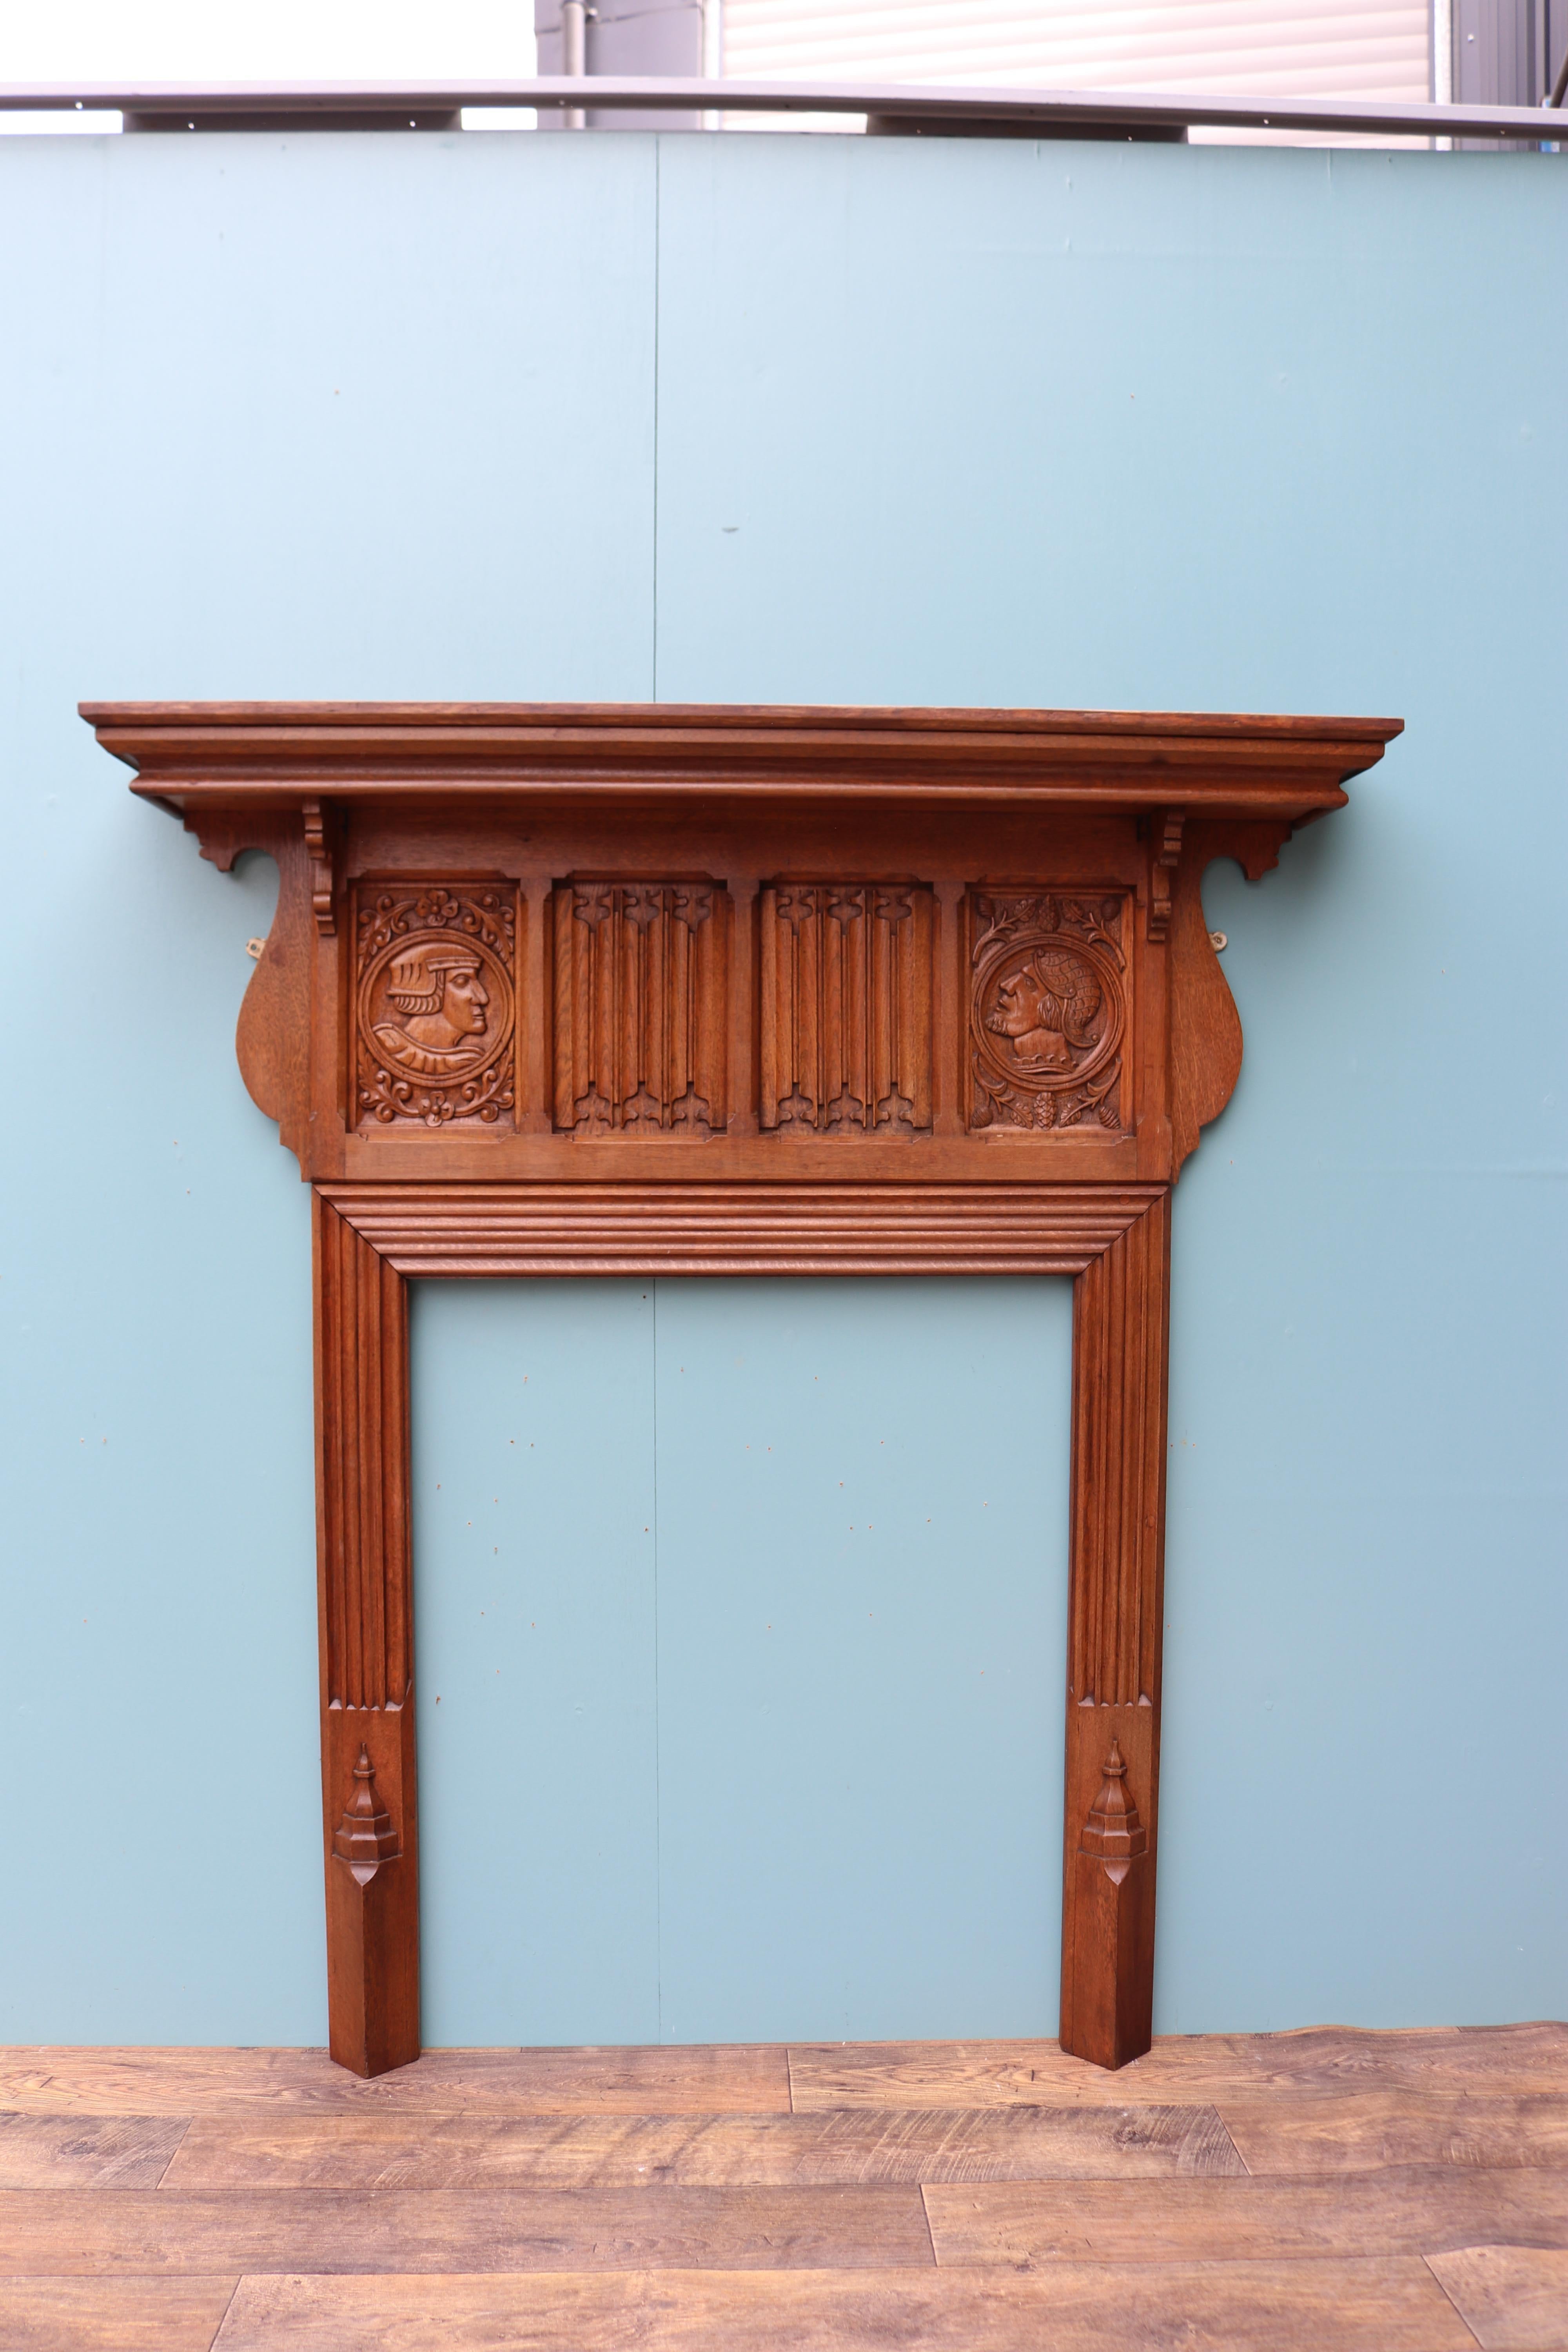 An English Jacobean style fire surround salvaged from a large country house near Petersfield, Hampshire. The frieze panel carved with heads and linen-fold panels.

Additional Dimensions

Opening Height 97.5 cm

Opening Width 80.5 cm

Width between